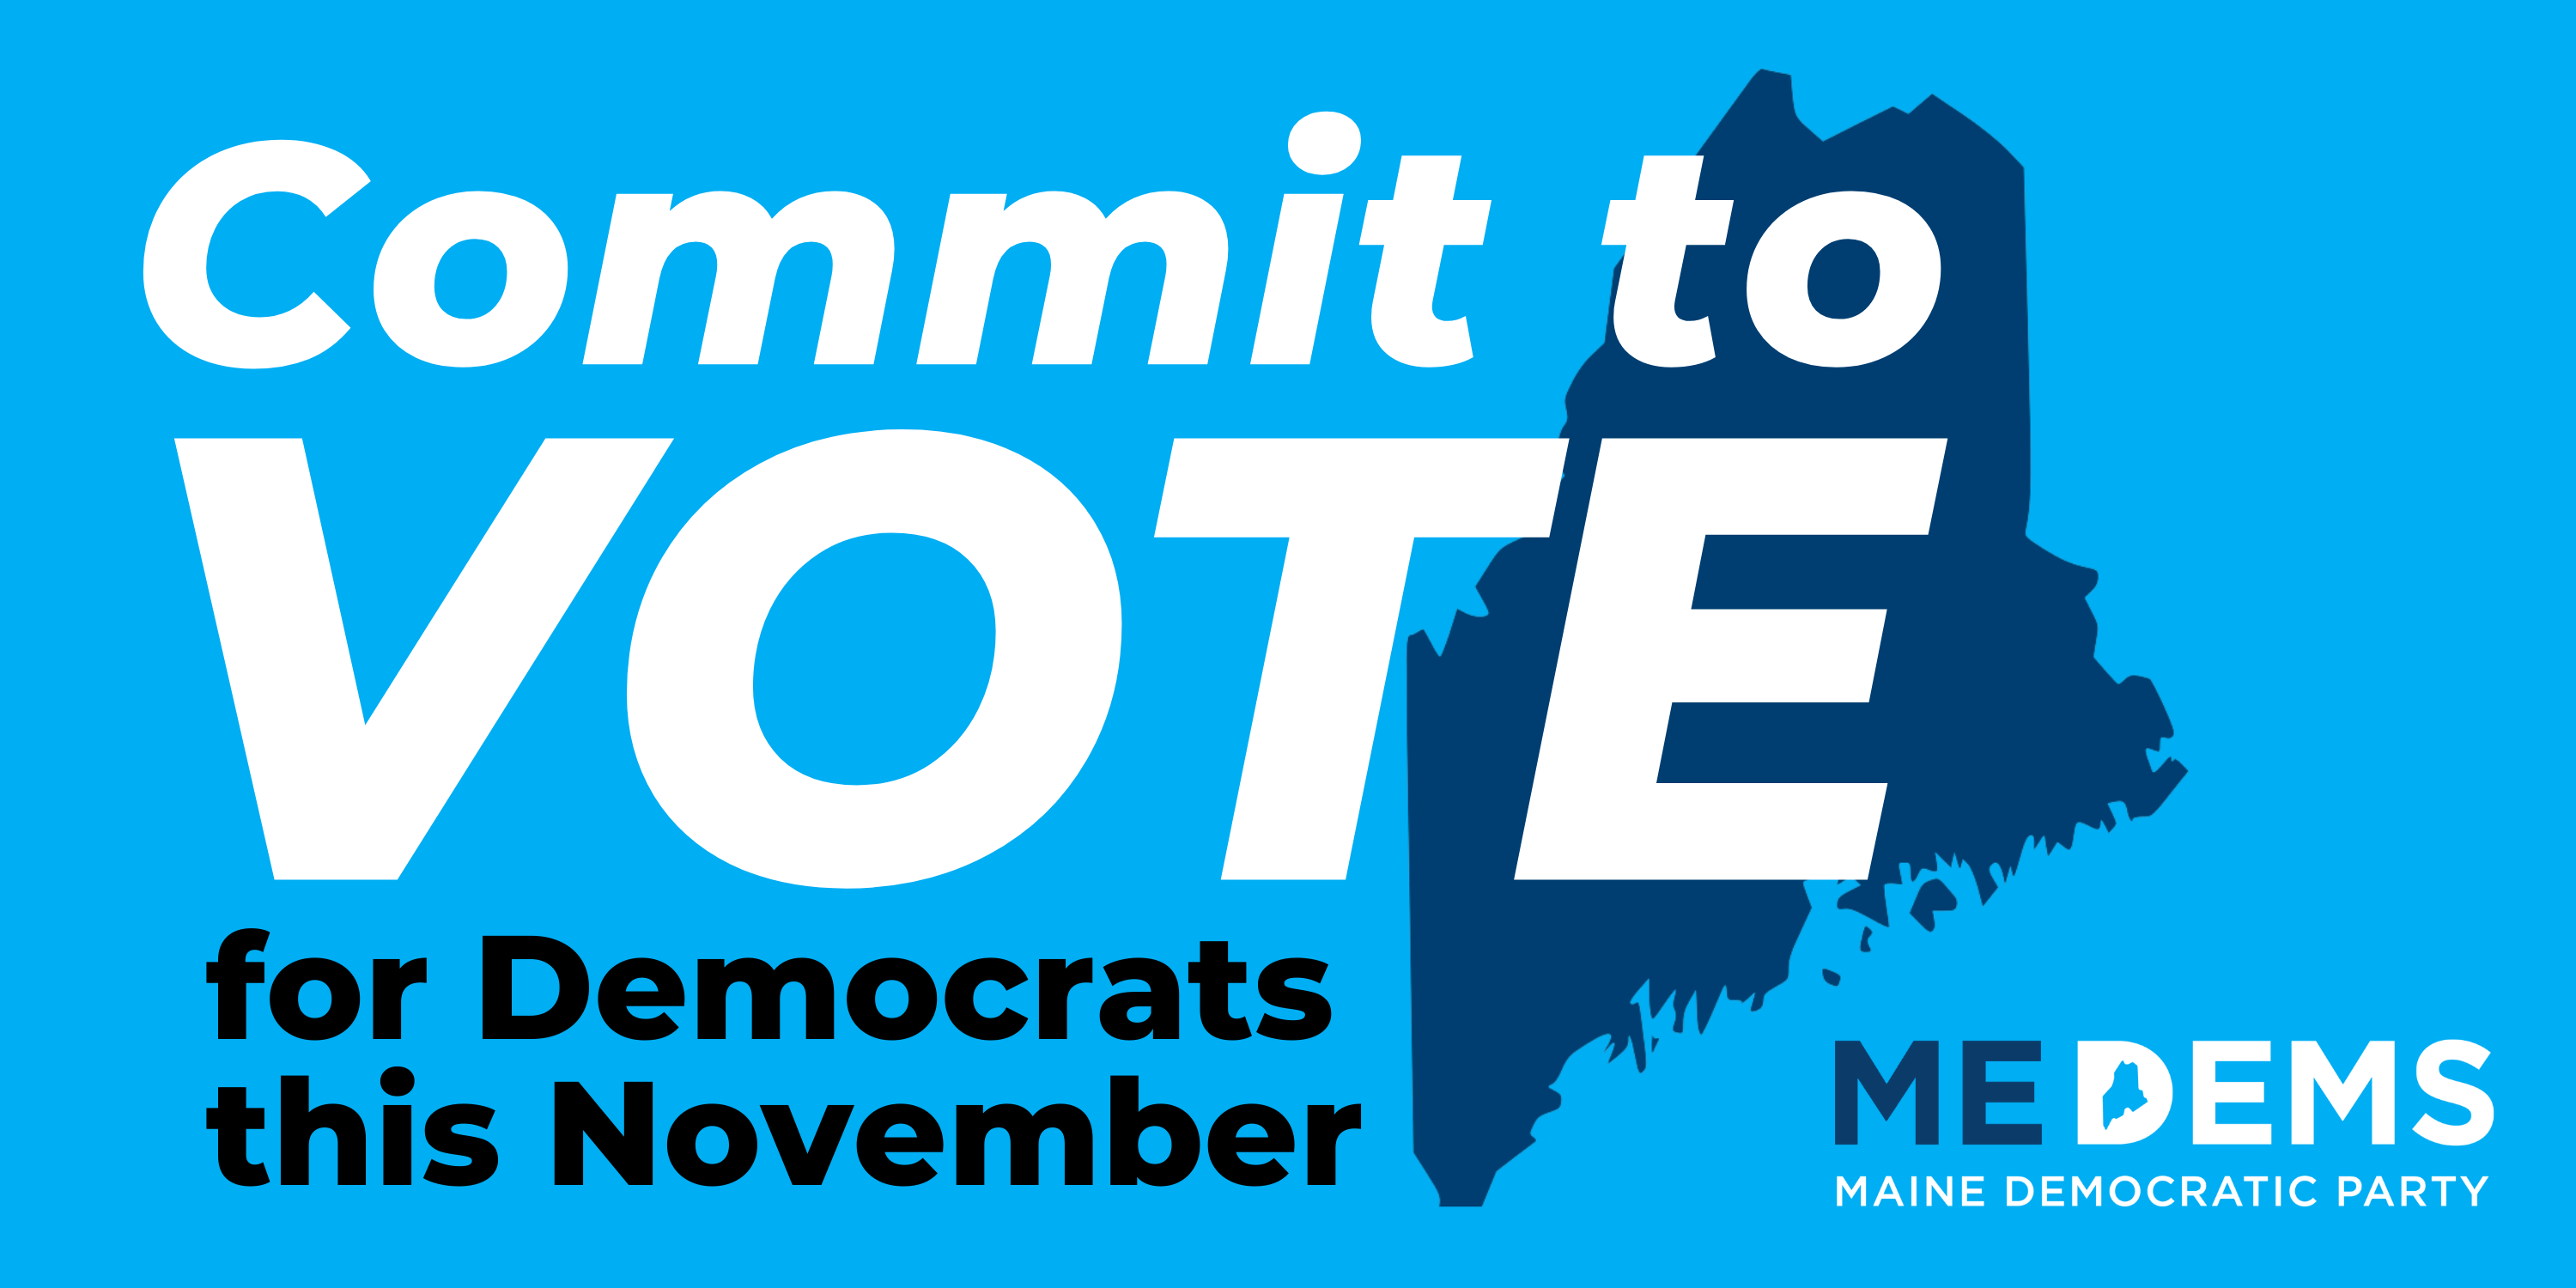 Commit to VOTE for Democrats this November